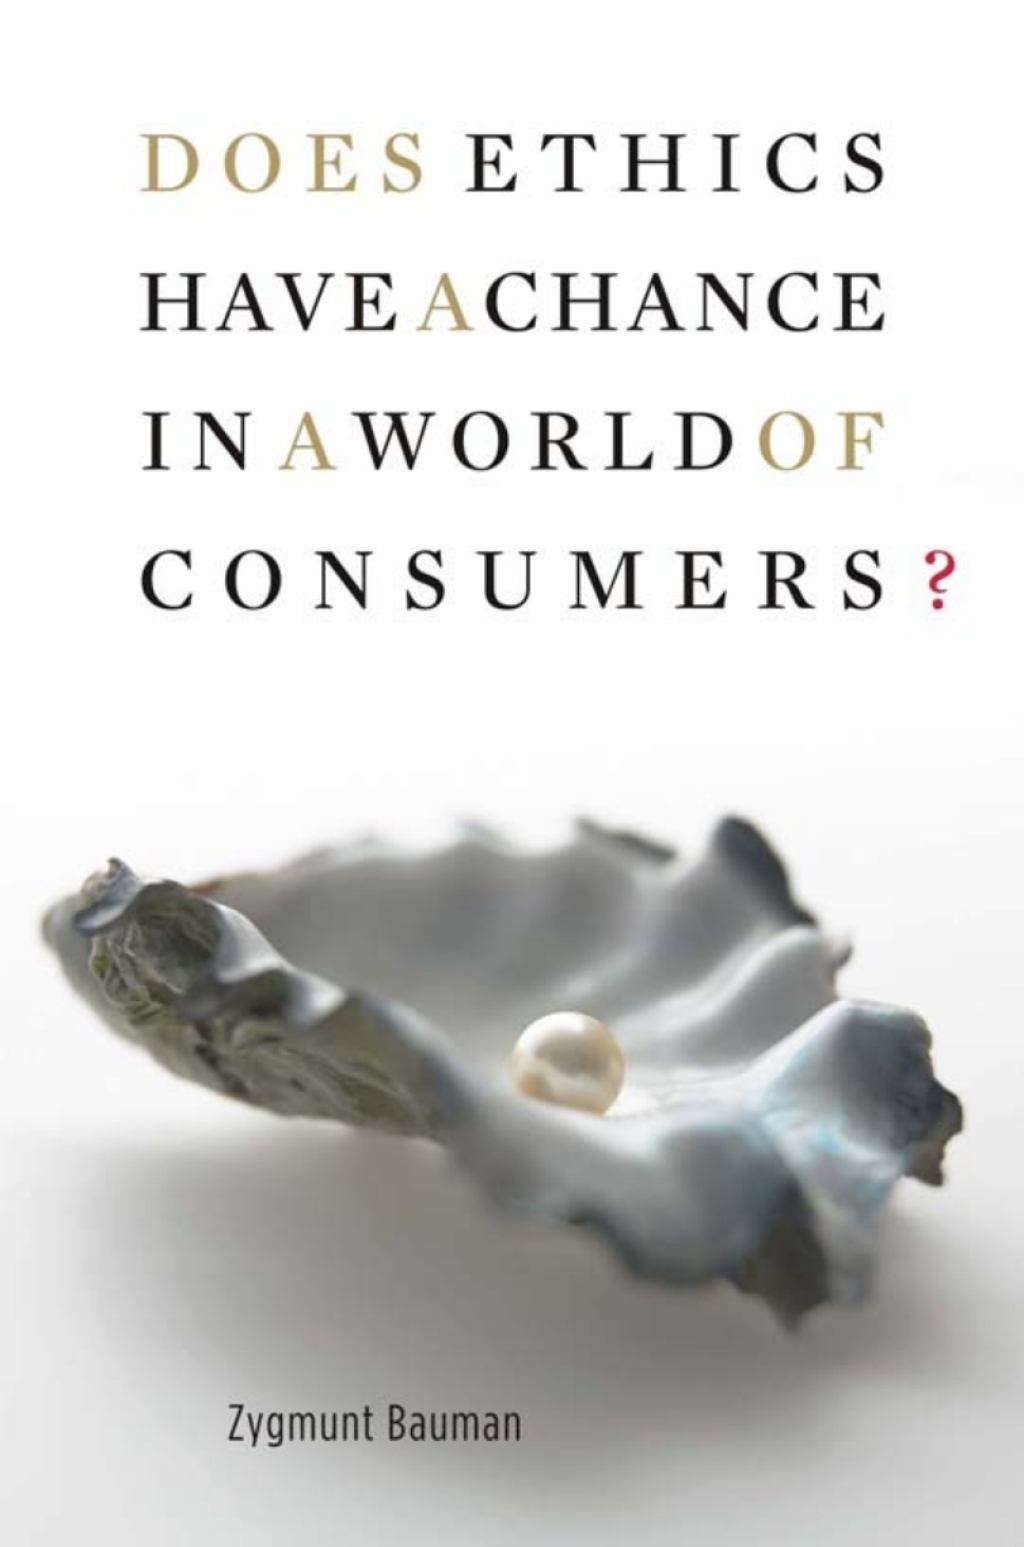 Does Ethics Have a Chance in a World of Consumers? (eBook) - Zygmunt Bauman,